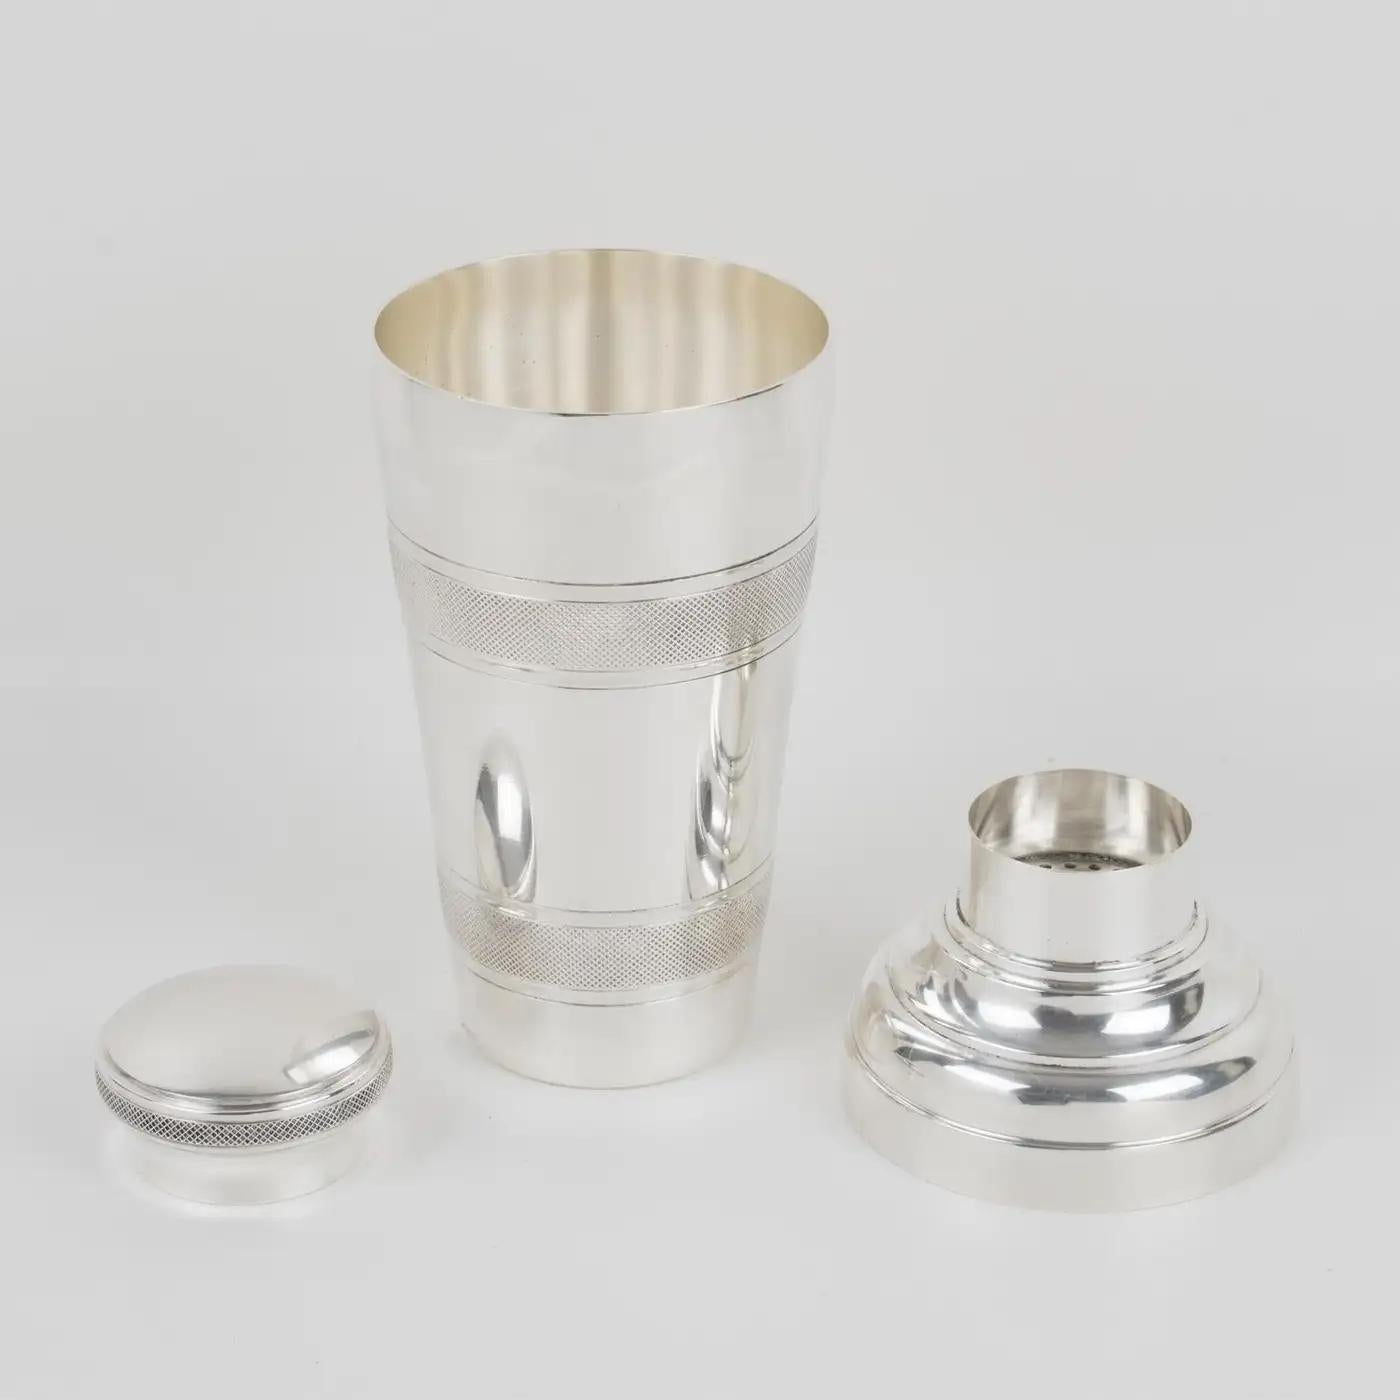 Mid-20th Century Art Deco Barware Silver Plate Cocktail Shaker and Six Glasses Set, France 1940s